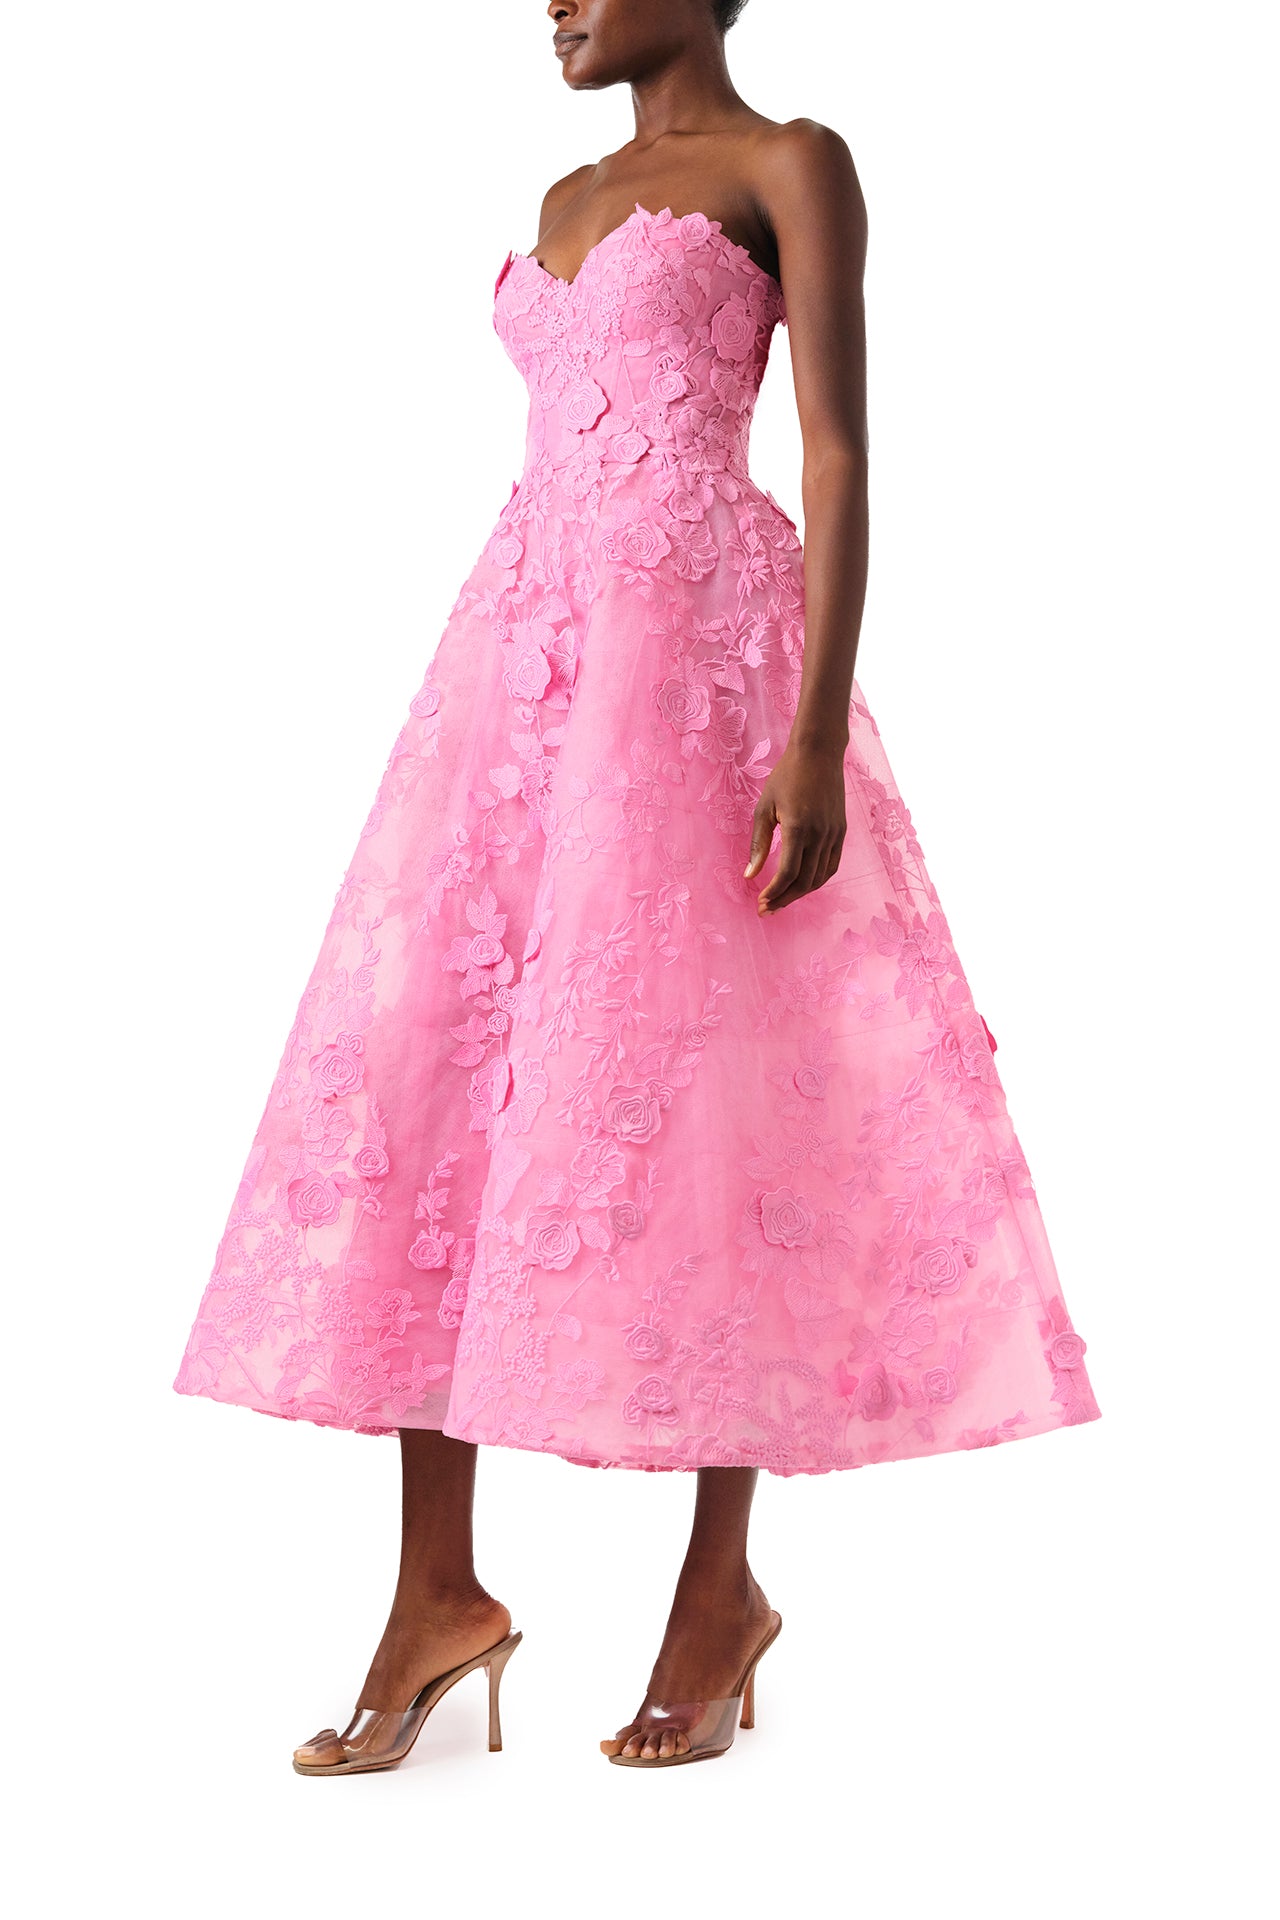 Monique Lhuillier Fall 2024 tea-length, strapless dress in pink 3D lace with full skirt and fitted sweetheart bodice - left side.